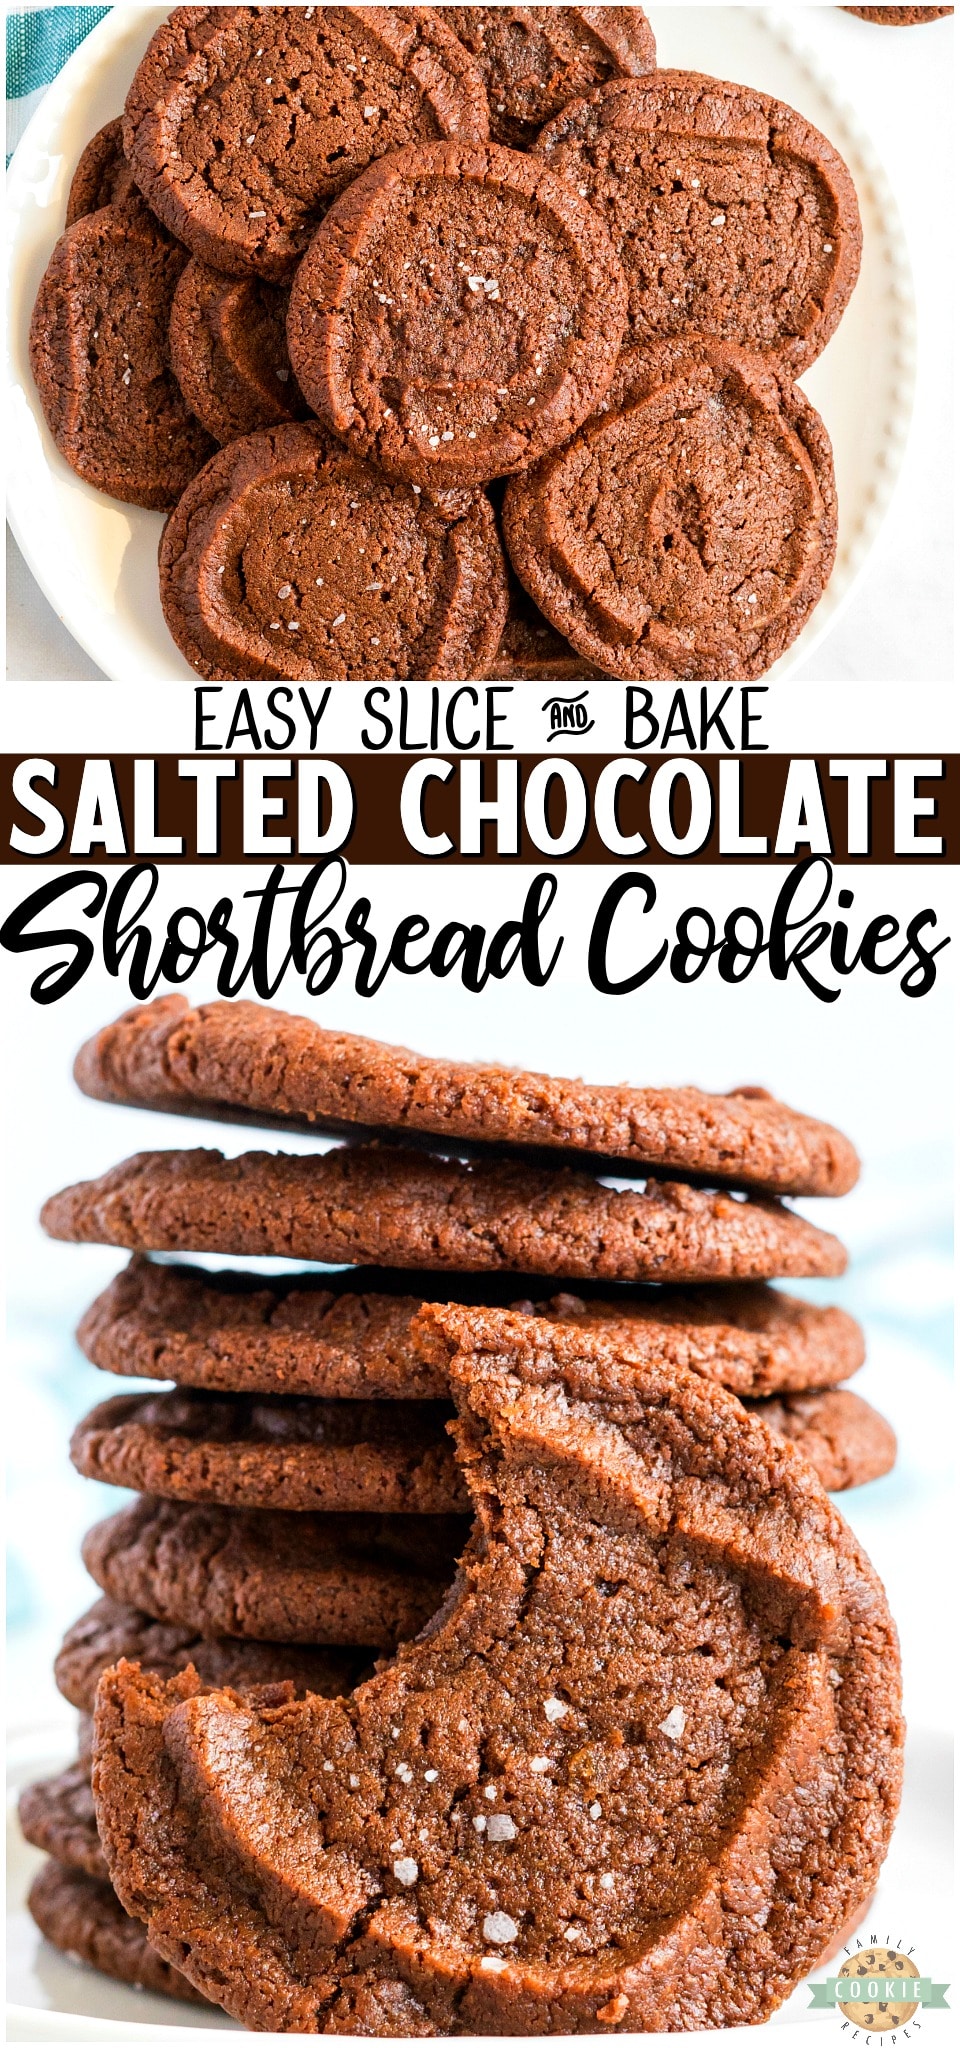 Salted Chocolate Shortbread Cookies made with cocoa powder and butter & topped with flakes of sea salt for the perfect chocolate cookie! Buttery shortbread slice & bake cookies that everyone enjoys!